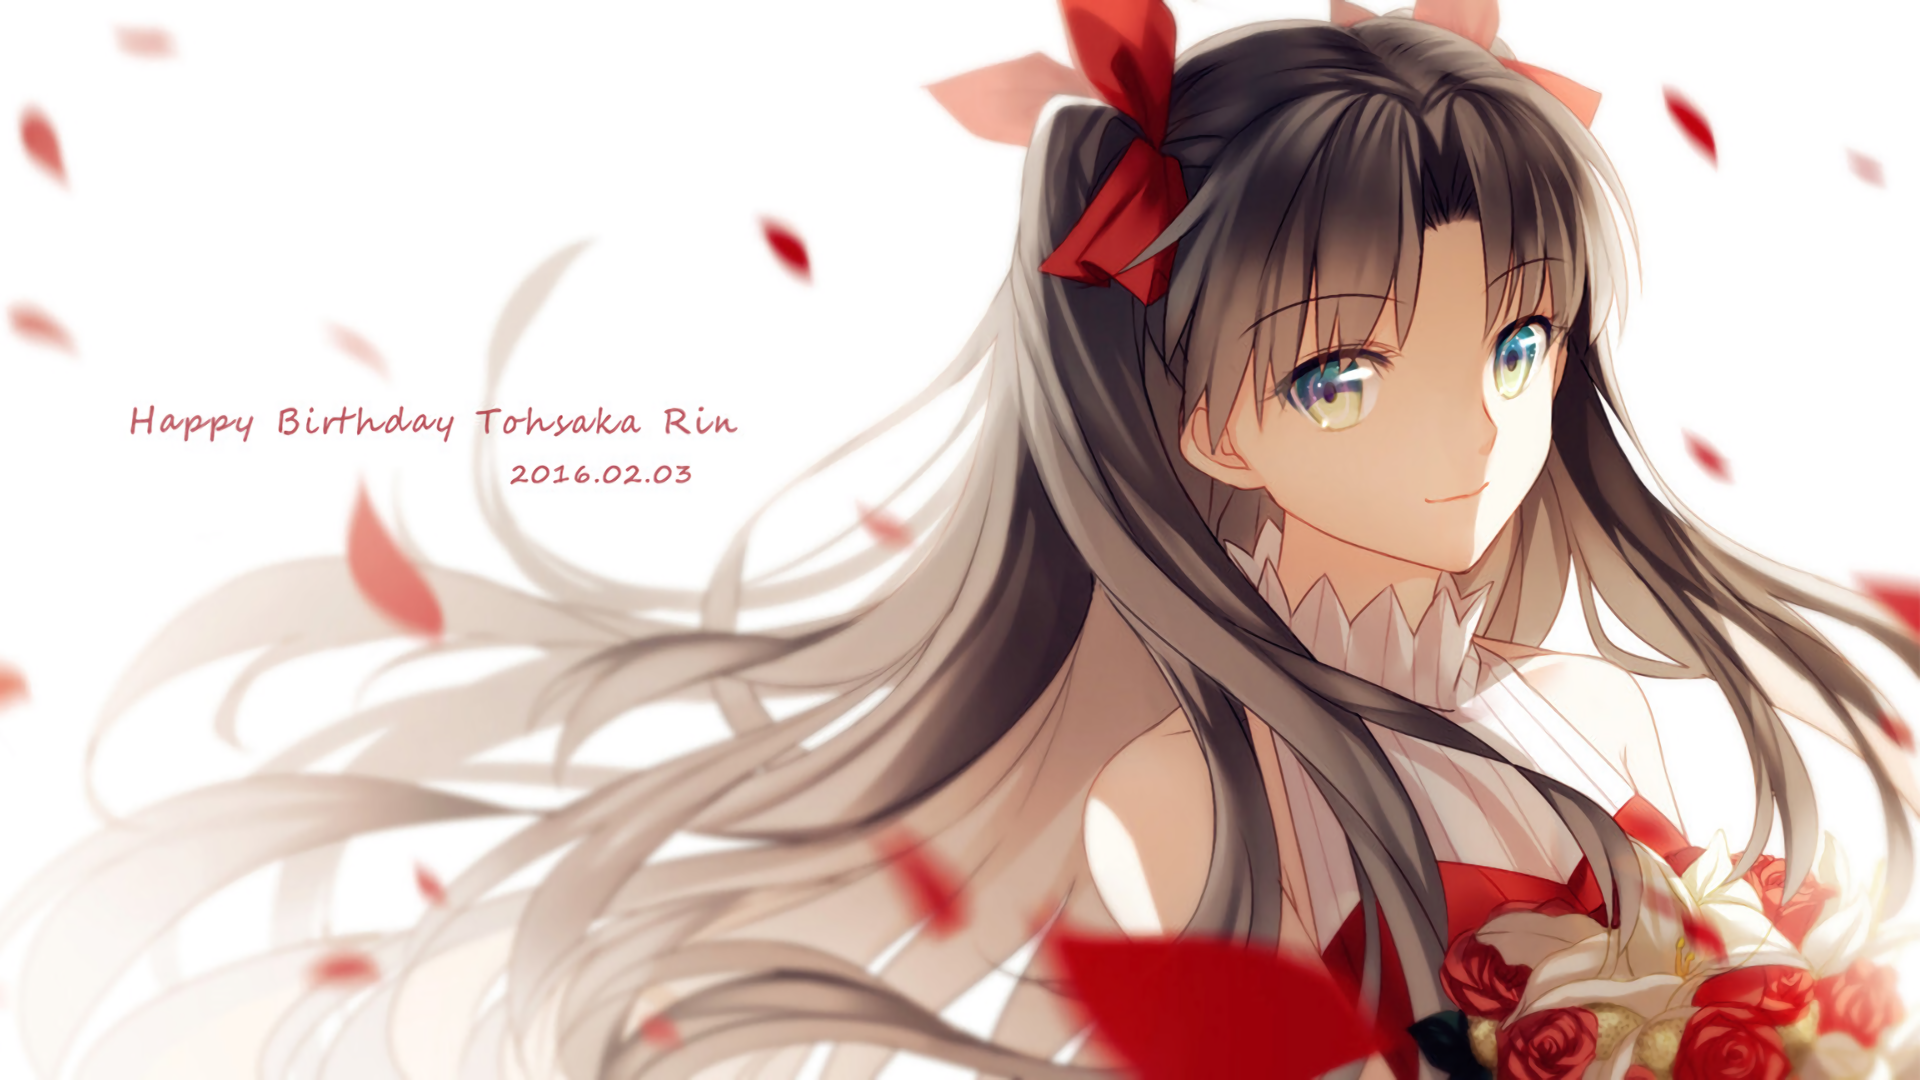 5. "Rin Tohsaka" from the anime "Fate/stay night" - wide 6